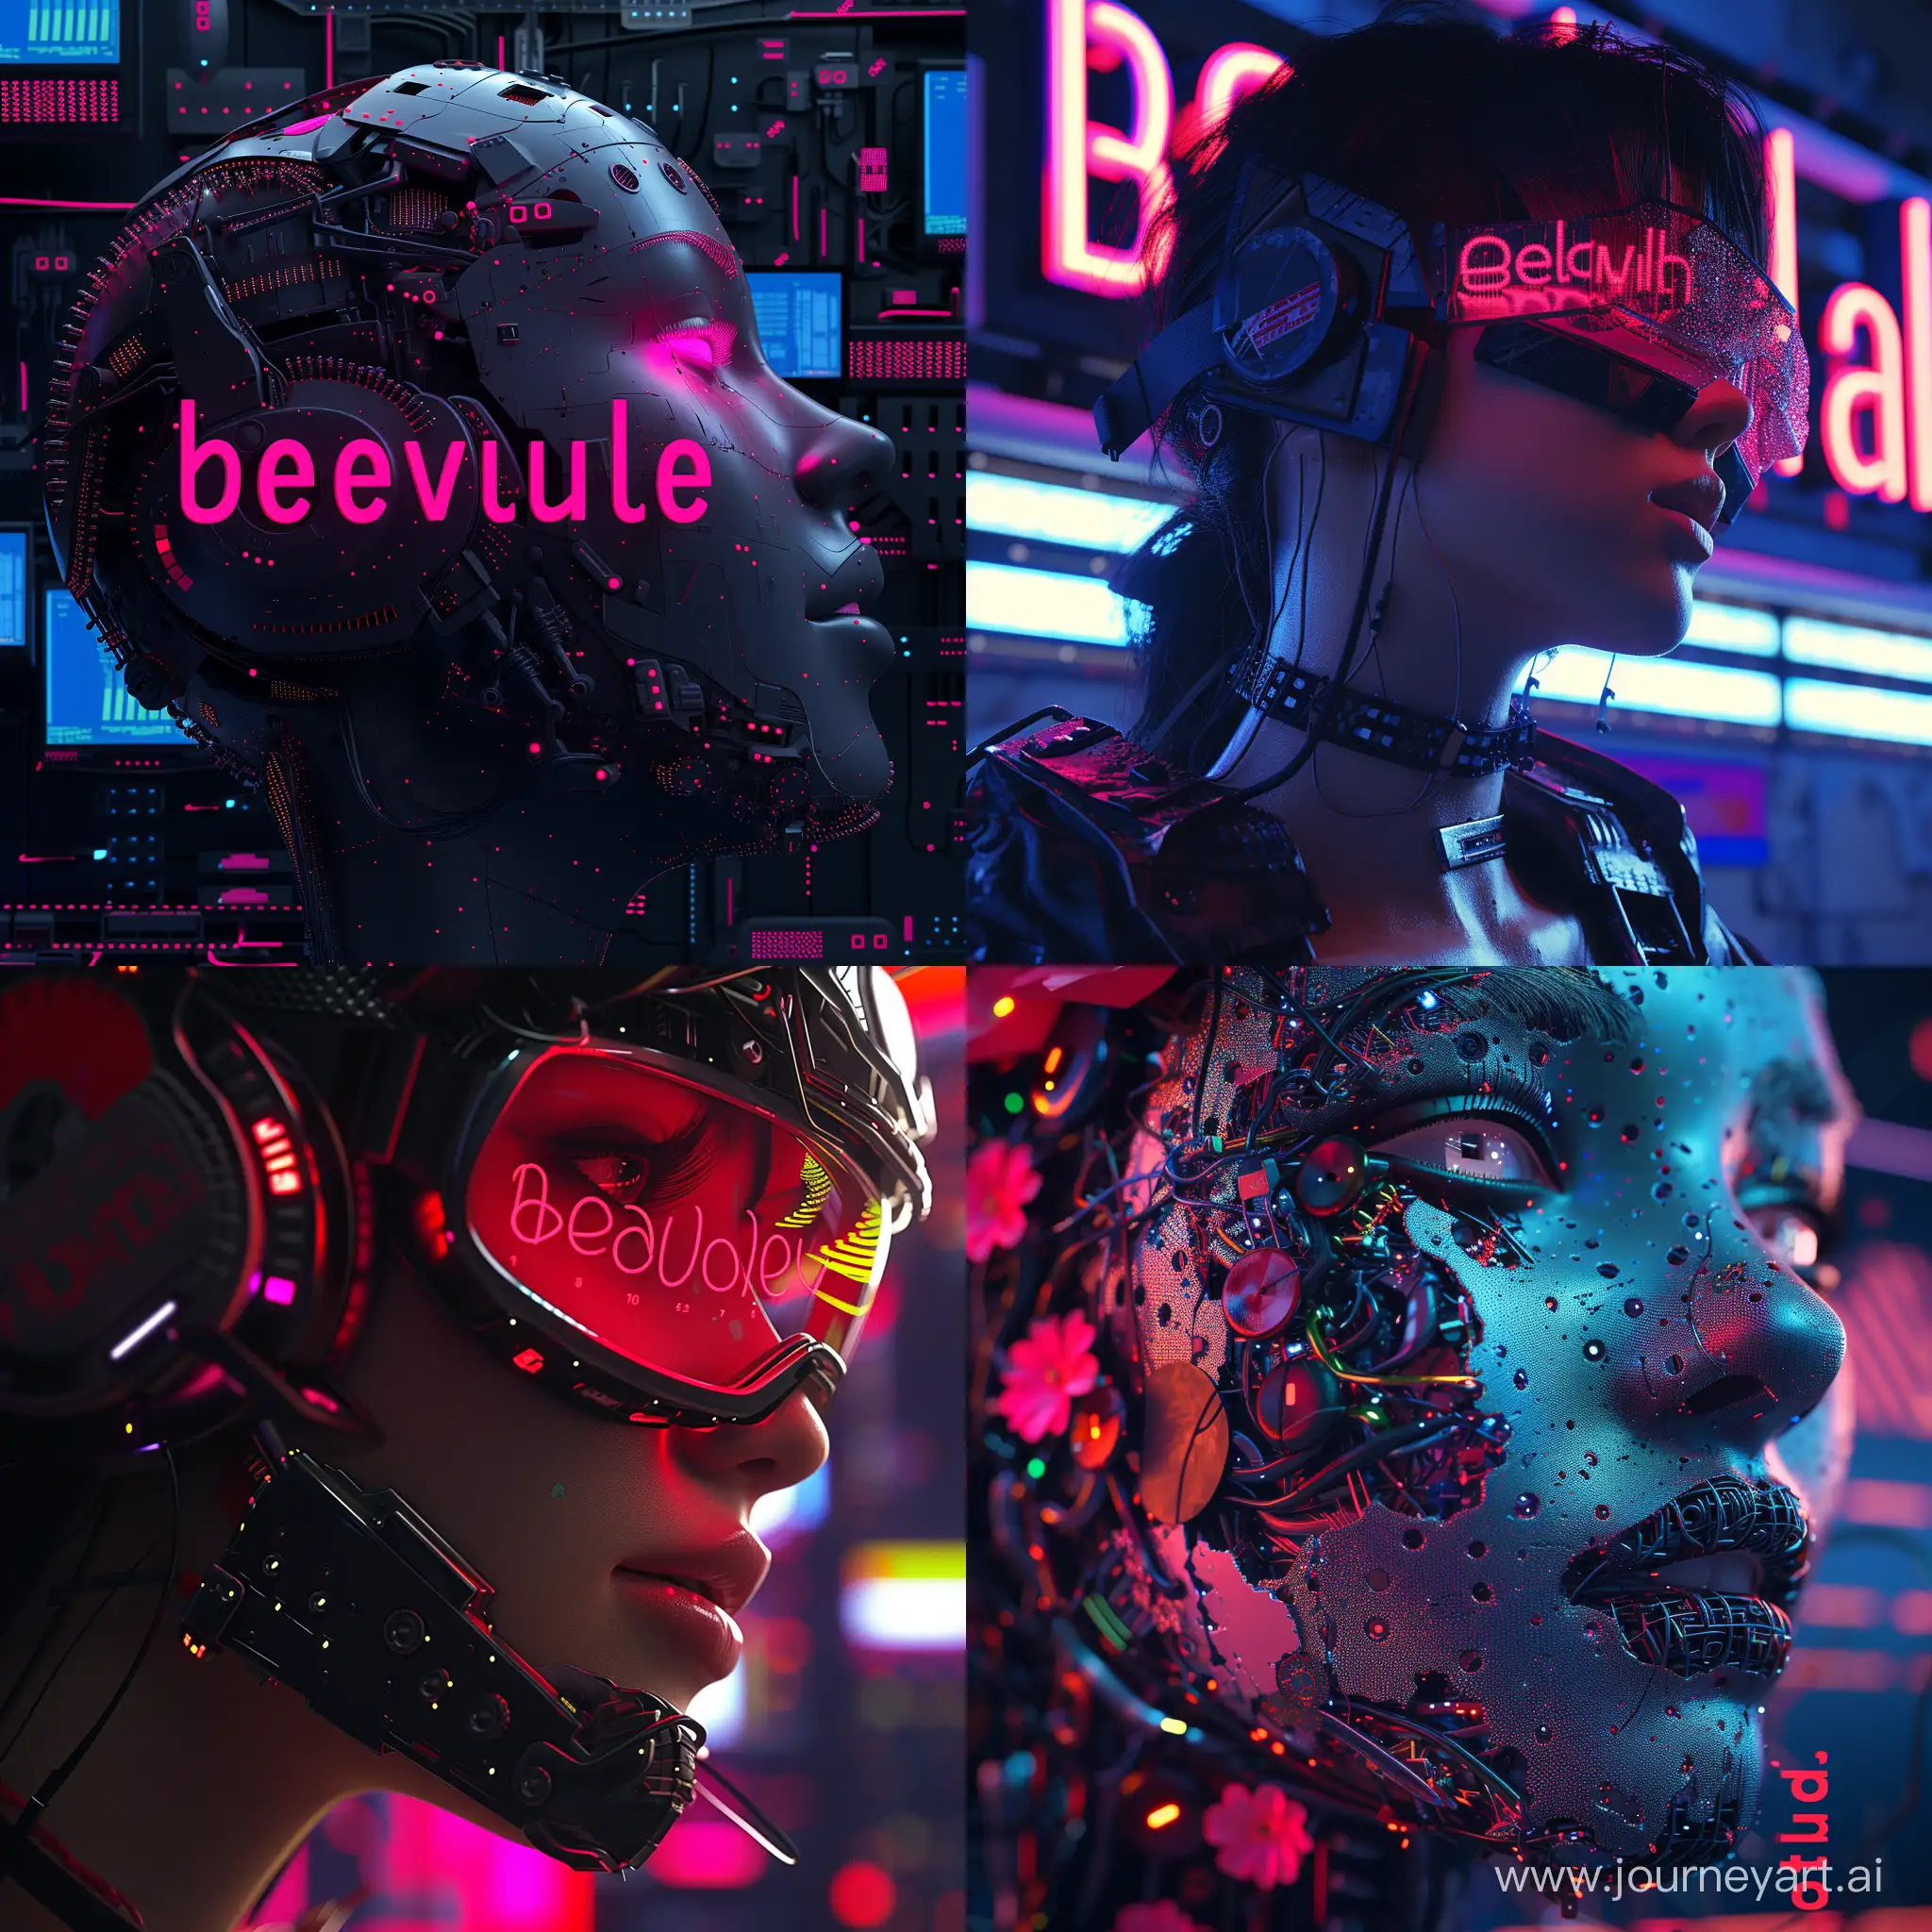 cover art for the track titled "beautiful" , cyberpunk style, 3d